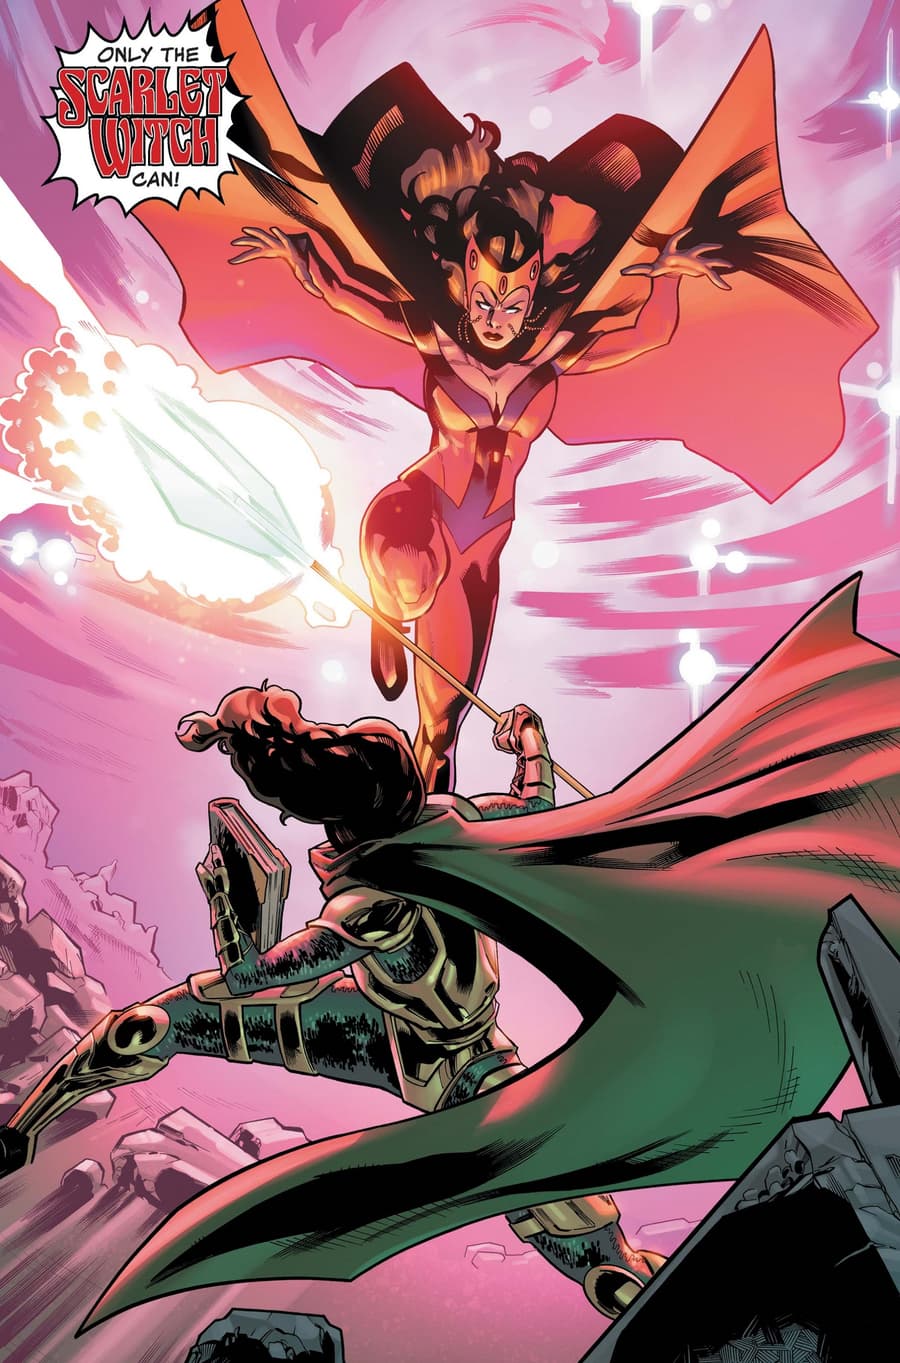 Scarlet Witch uses her chaos form of magic.